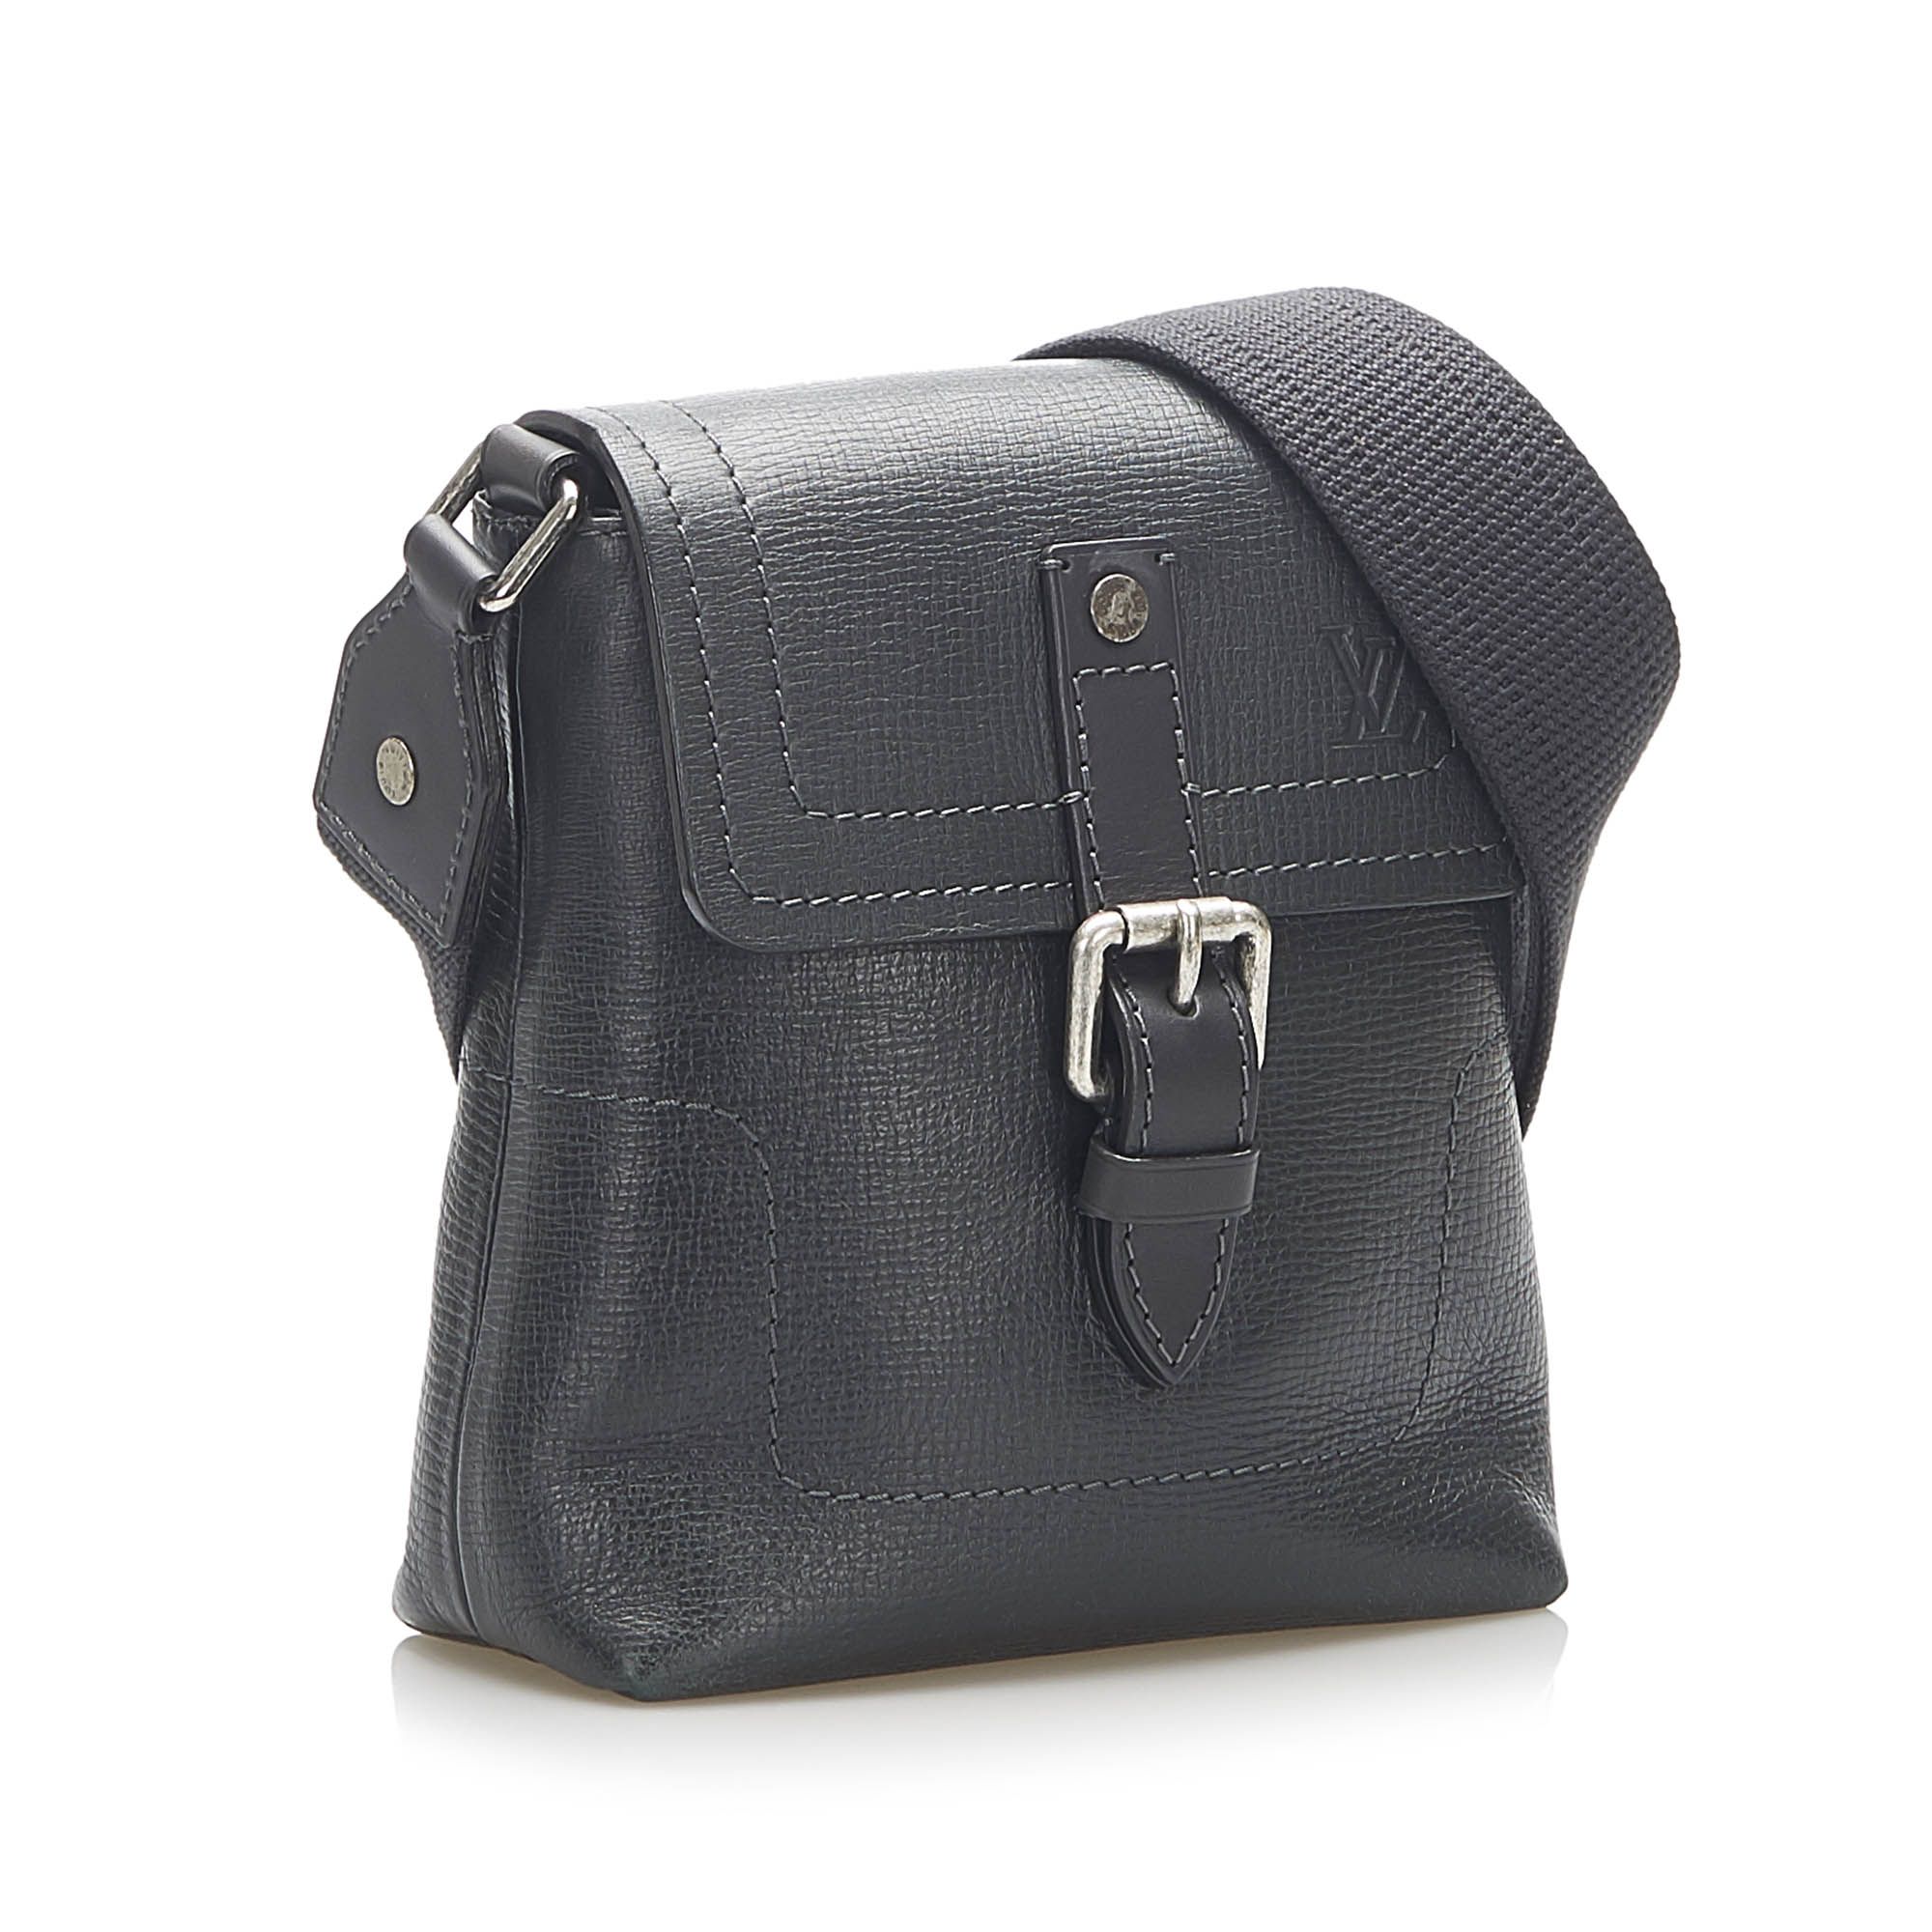 VINTAGE. RRP AS NEW. The Utah Yuma features a leather body, a flat strap, a top flap with buckle closure, and an interior slip pocket.
Dimensions:
Length 20cm
Width 19cm
Depth 8cm
Shoulder Drop 45cm

Original Accessories: Dust Bag, Box

Serial Number: RI 1112
Color: Black
Material: Leather x Calf
Country of Origin: France
Boutique Reference: SSU95202K1342


Product Rating: GoodCondition